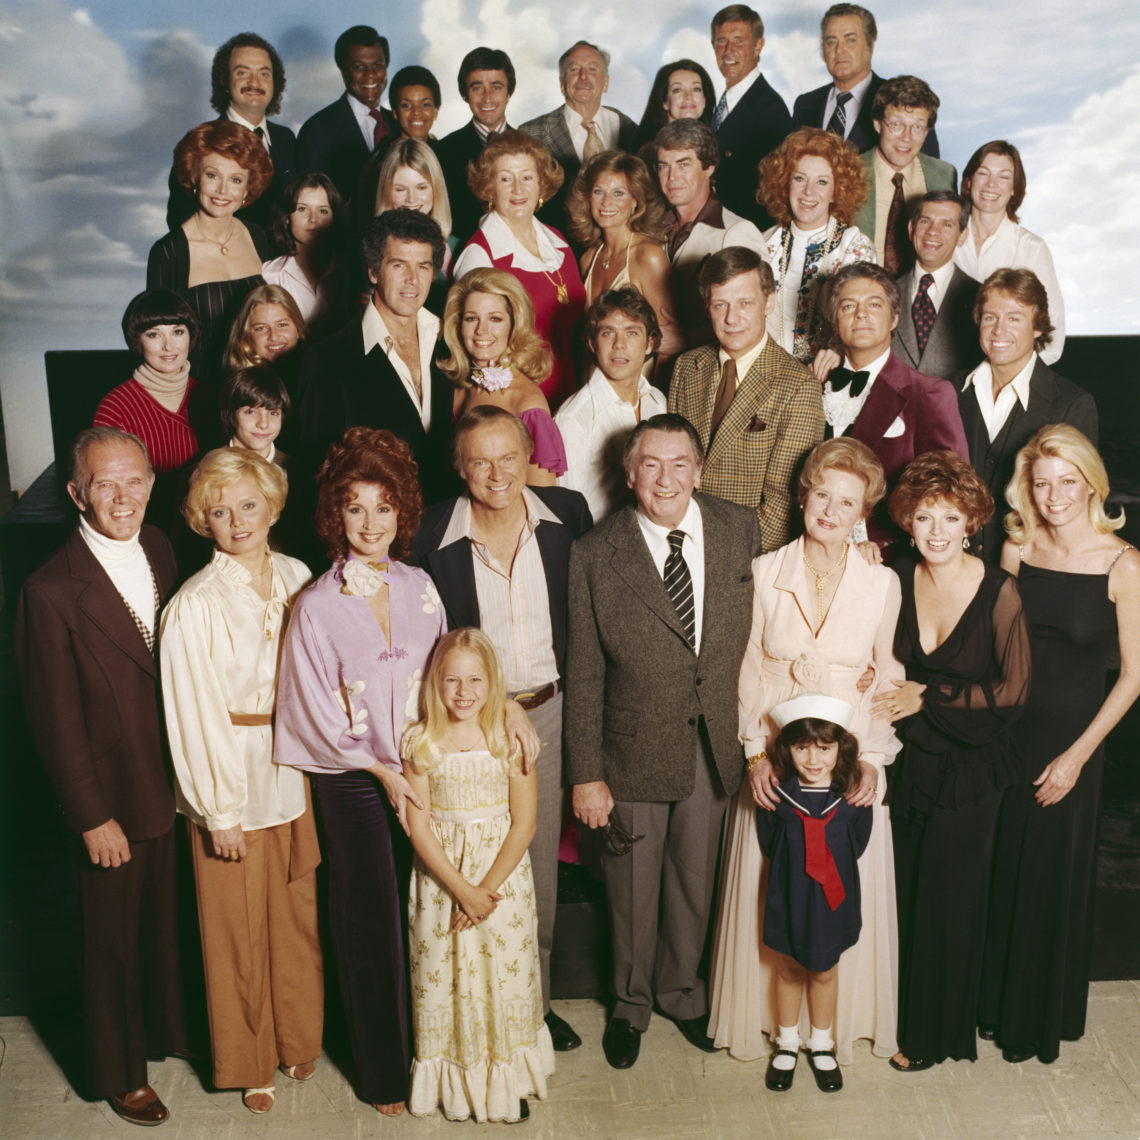 Original Days Of Our Lives cast now from co-star marriages to medical crisis'